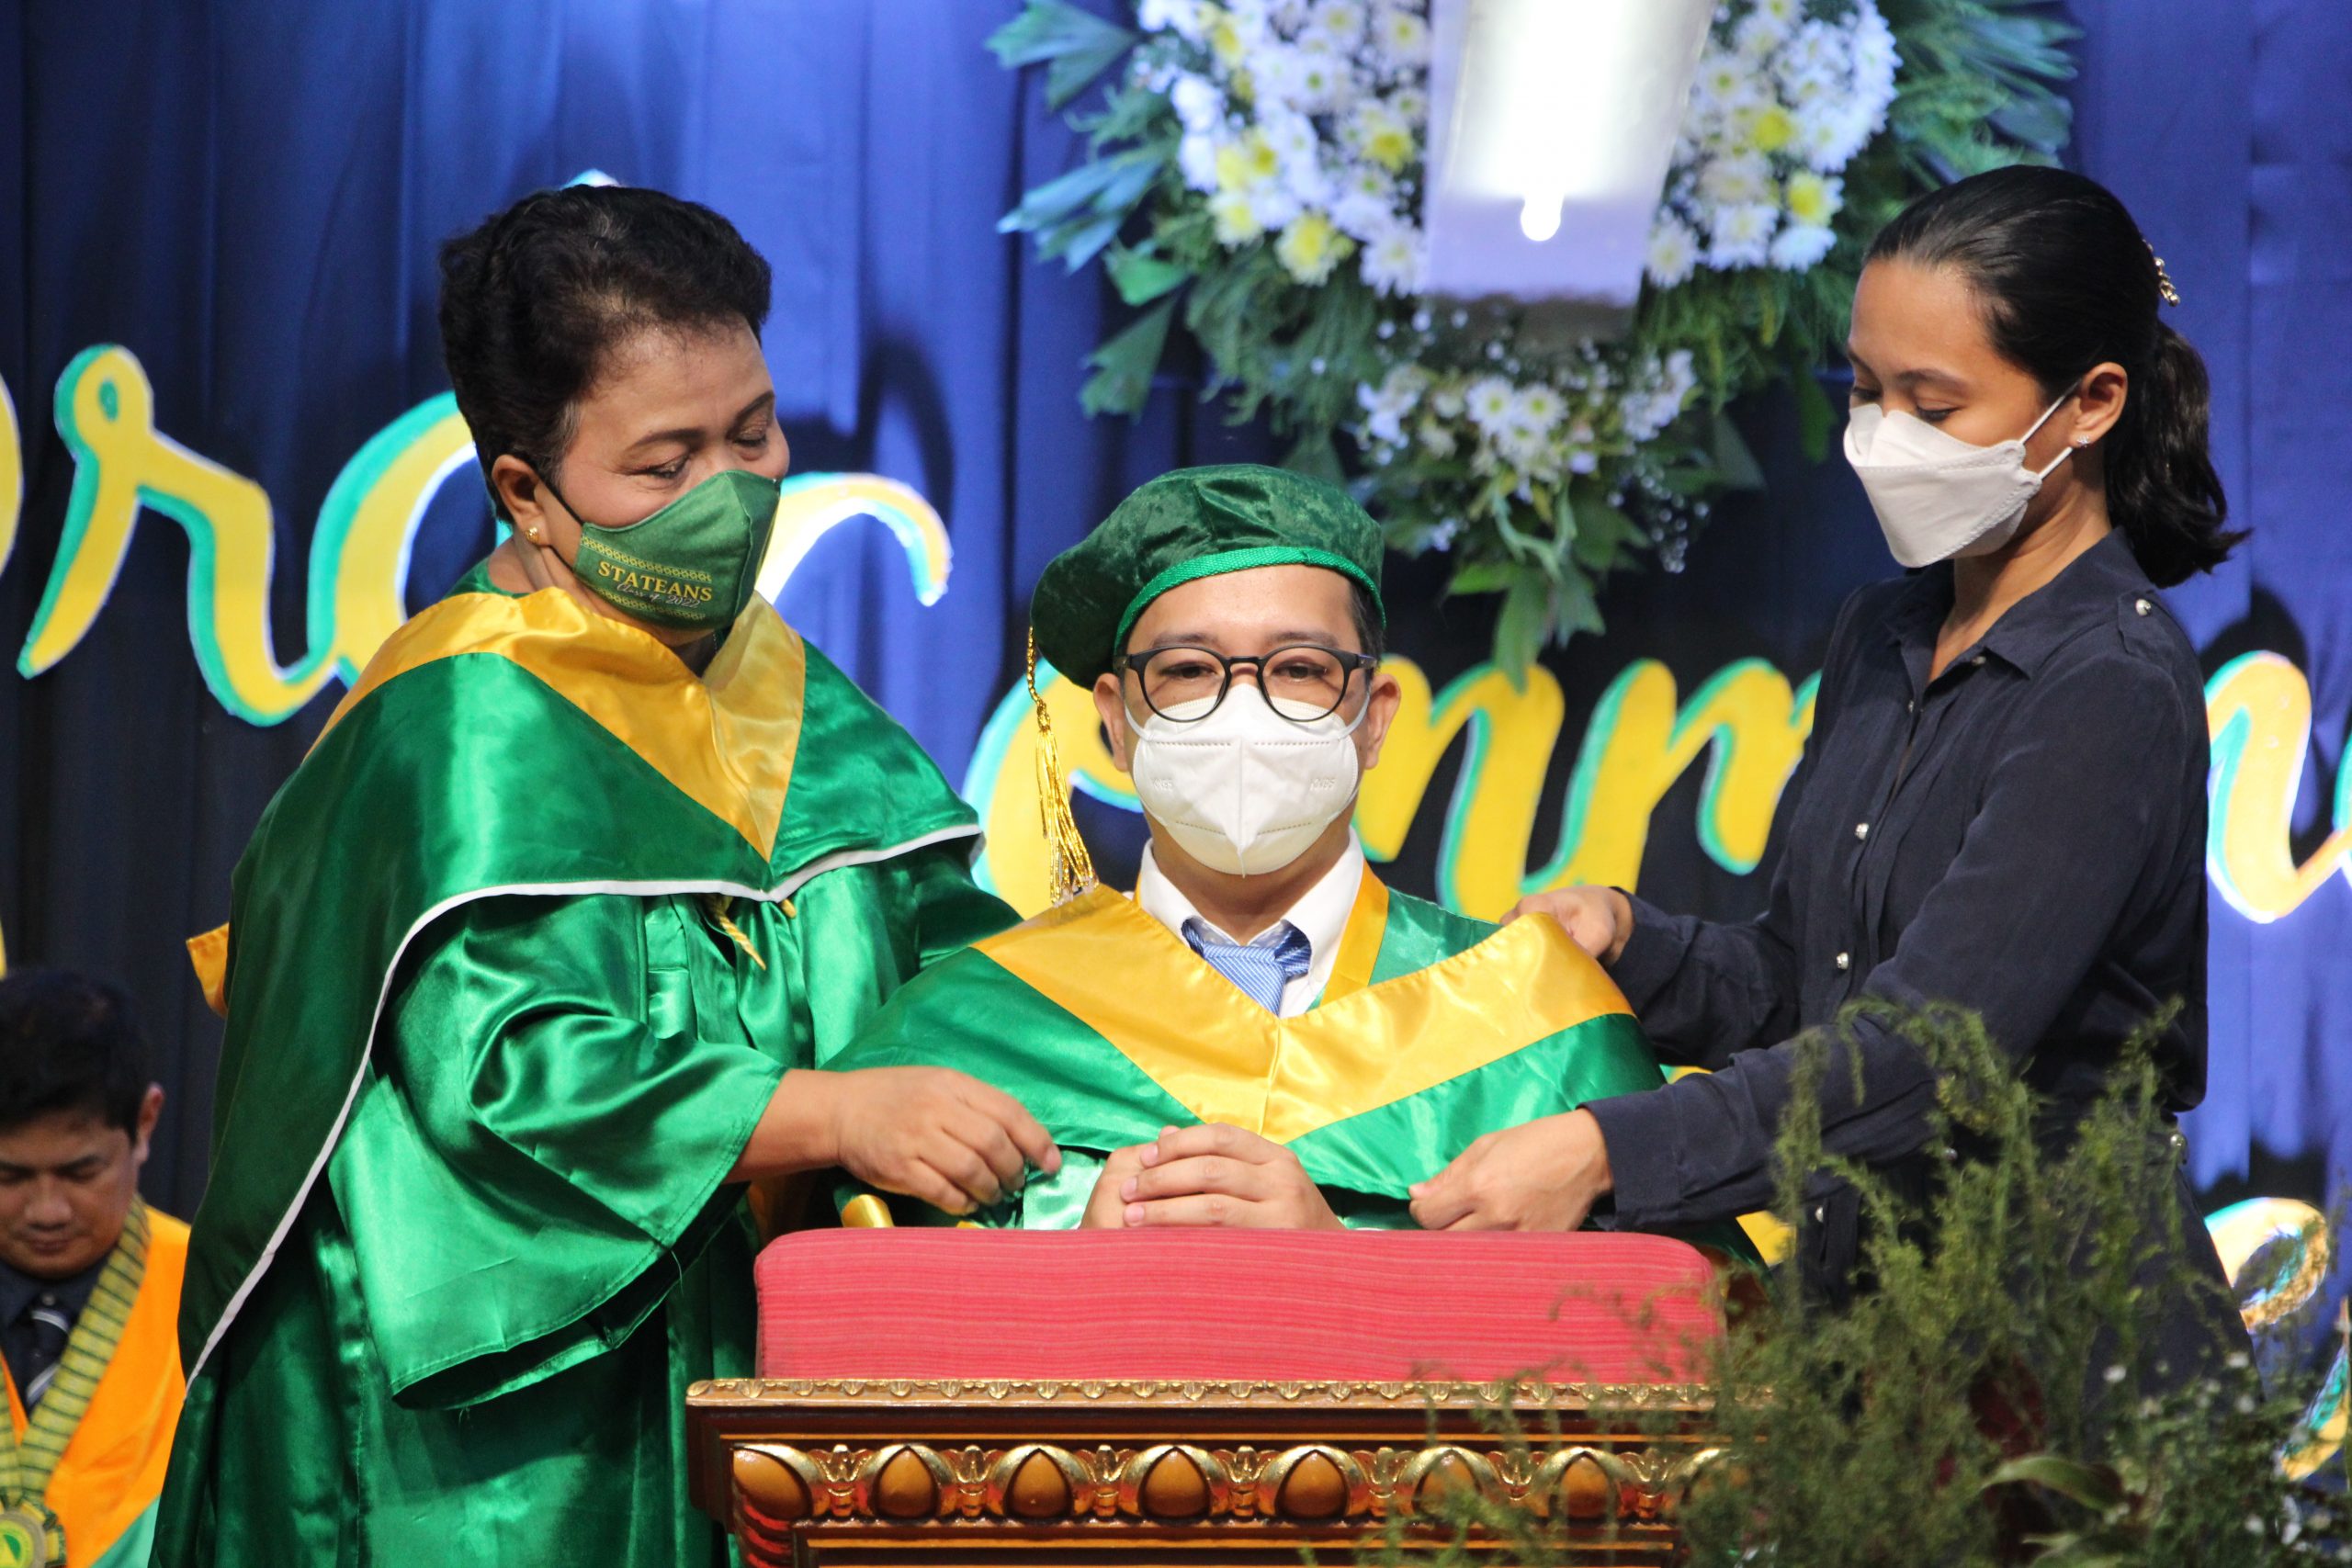 CBSUA CAMPUSES HOLD FACE-TO-FACE COMMENCEMENT EXERCISES